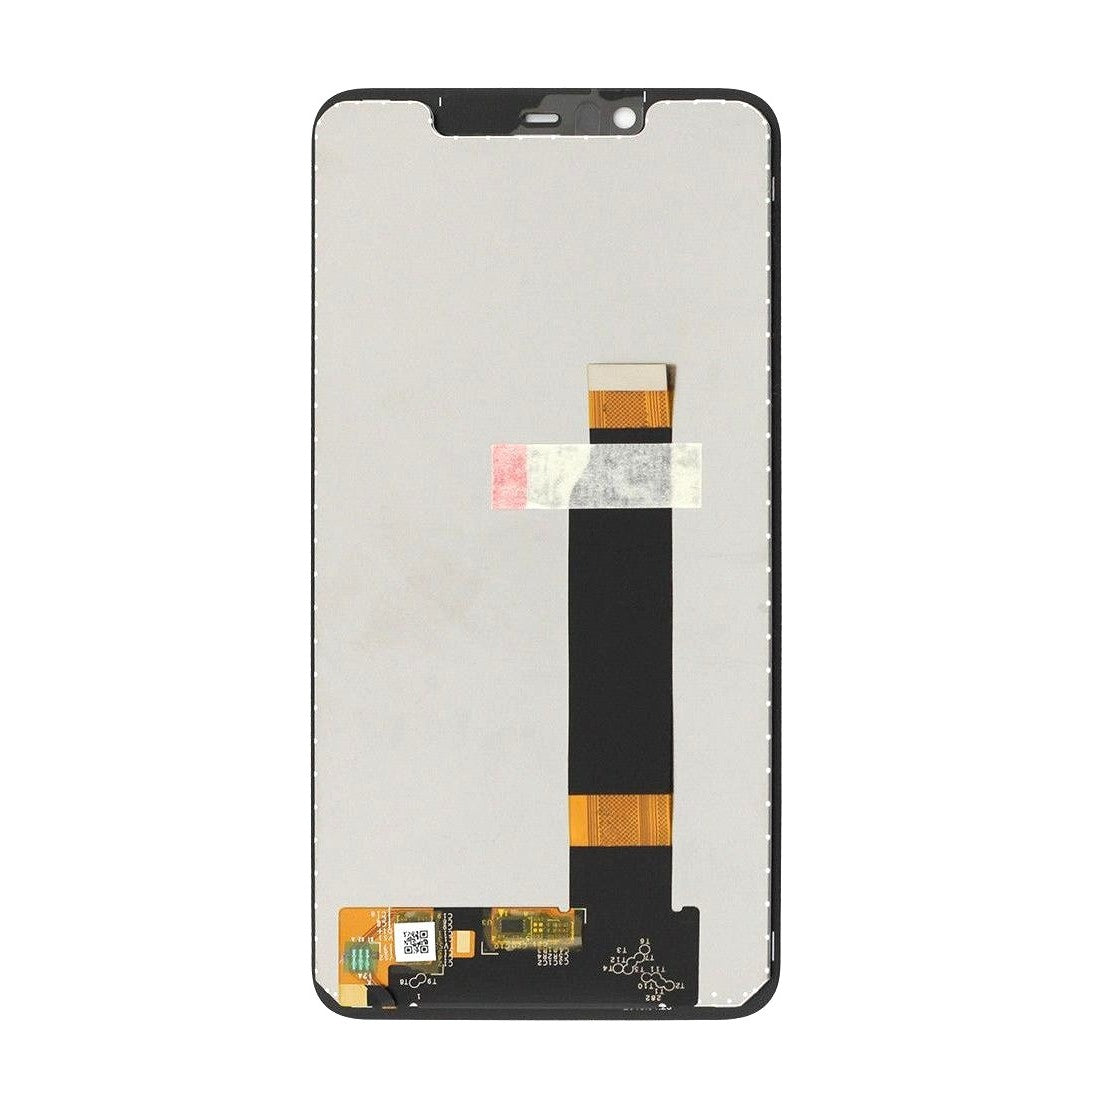 Nokia 5.1 Plus Display With Touch Screen Replacement Combo